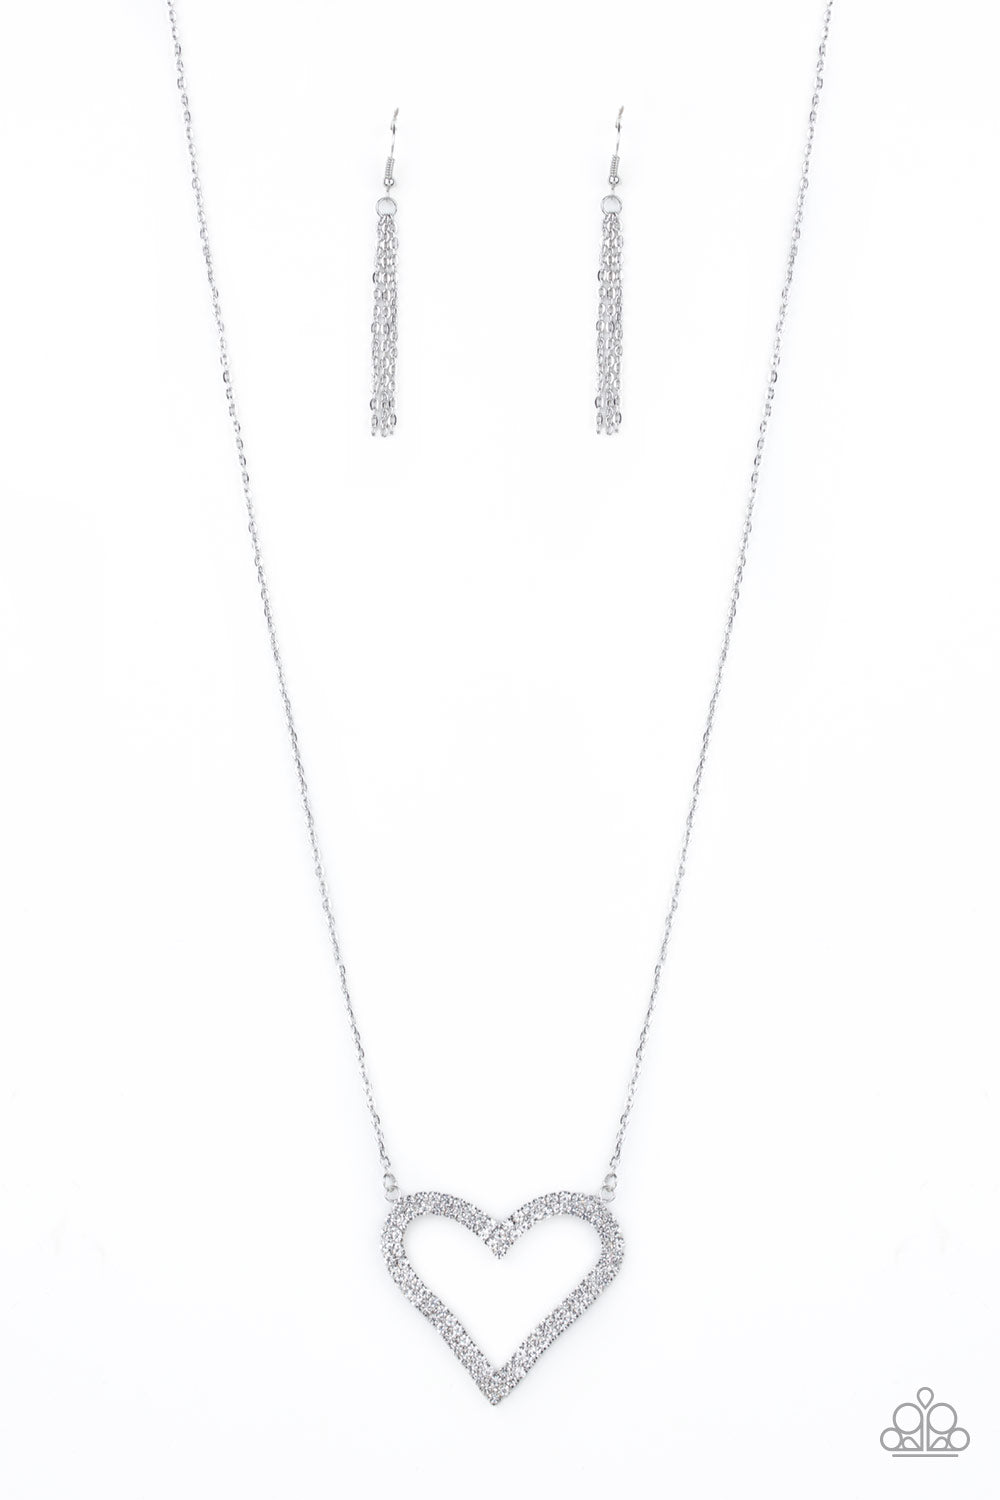 Pull Some HEART Strings Necklace__White